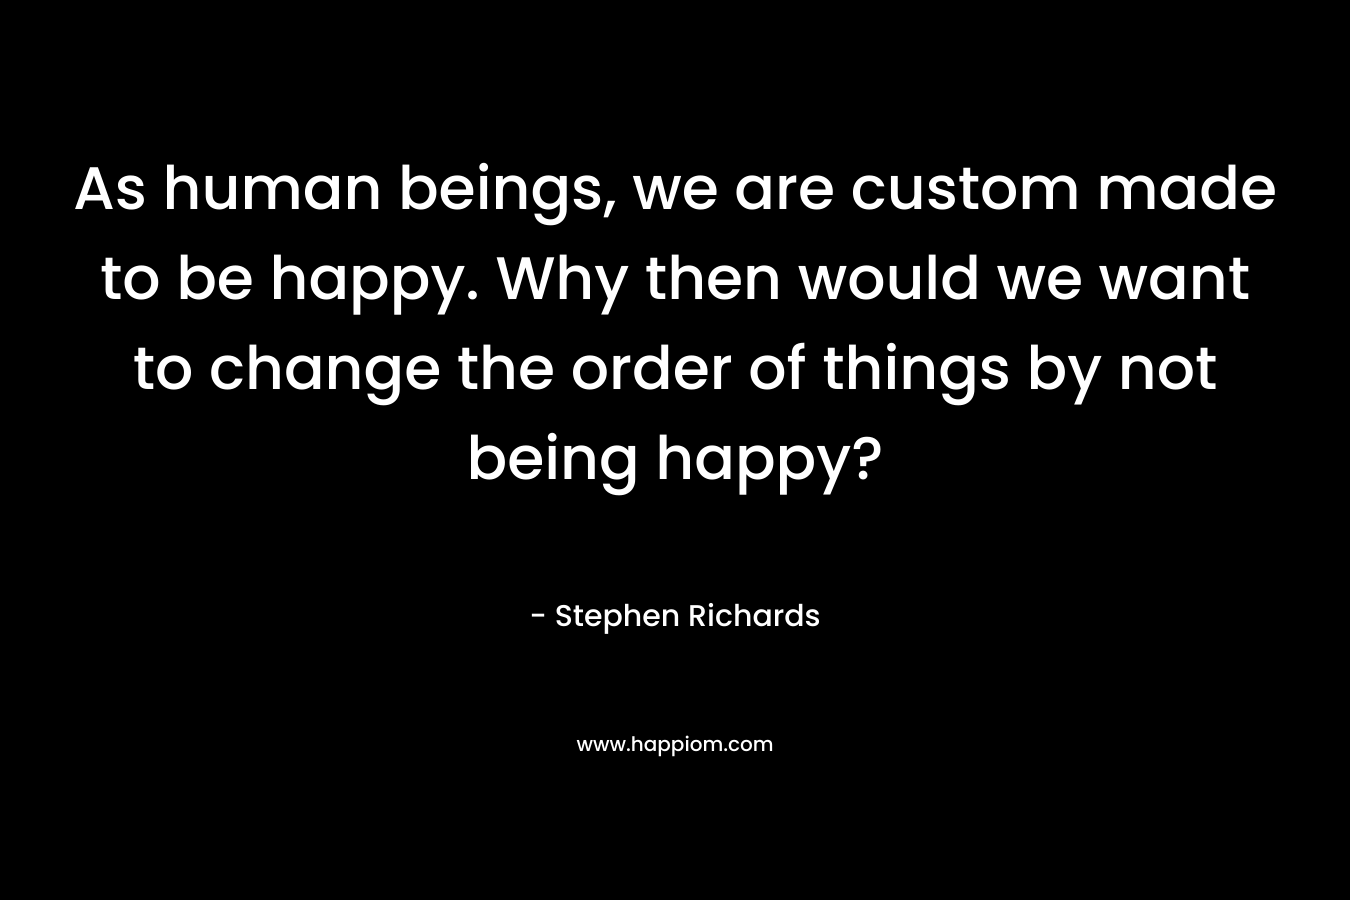 As human beings, we are custom made to be happy. Why then would we want to change the order of things by not being happy? – Stephen Richards